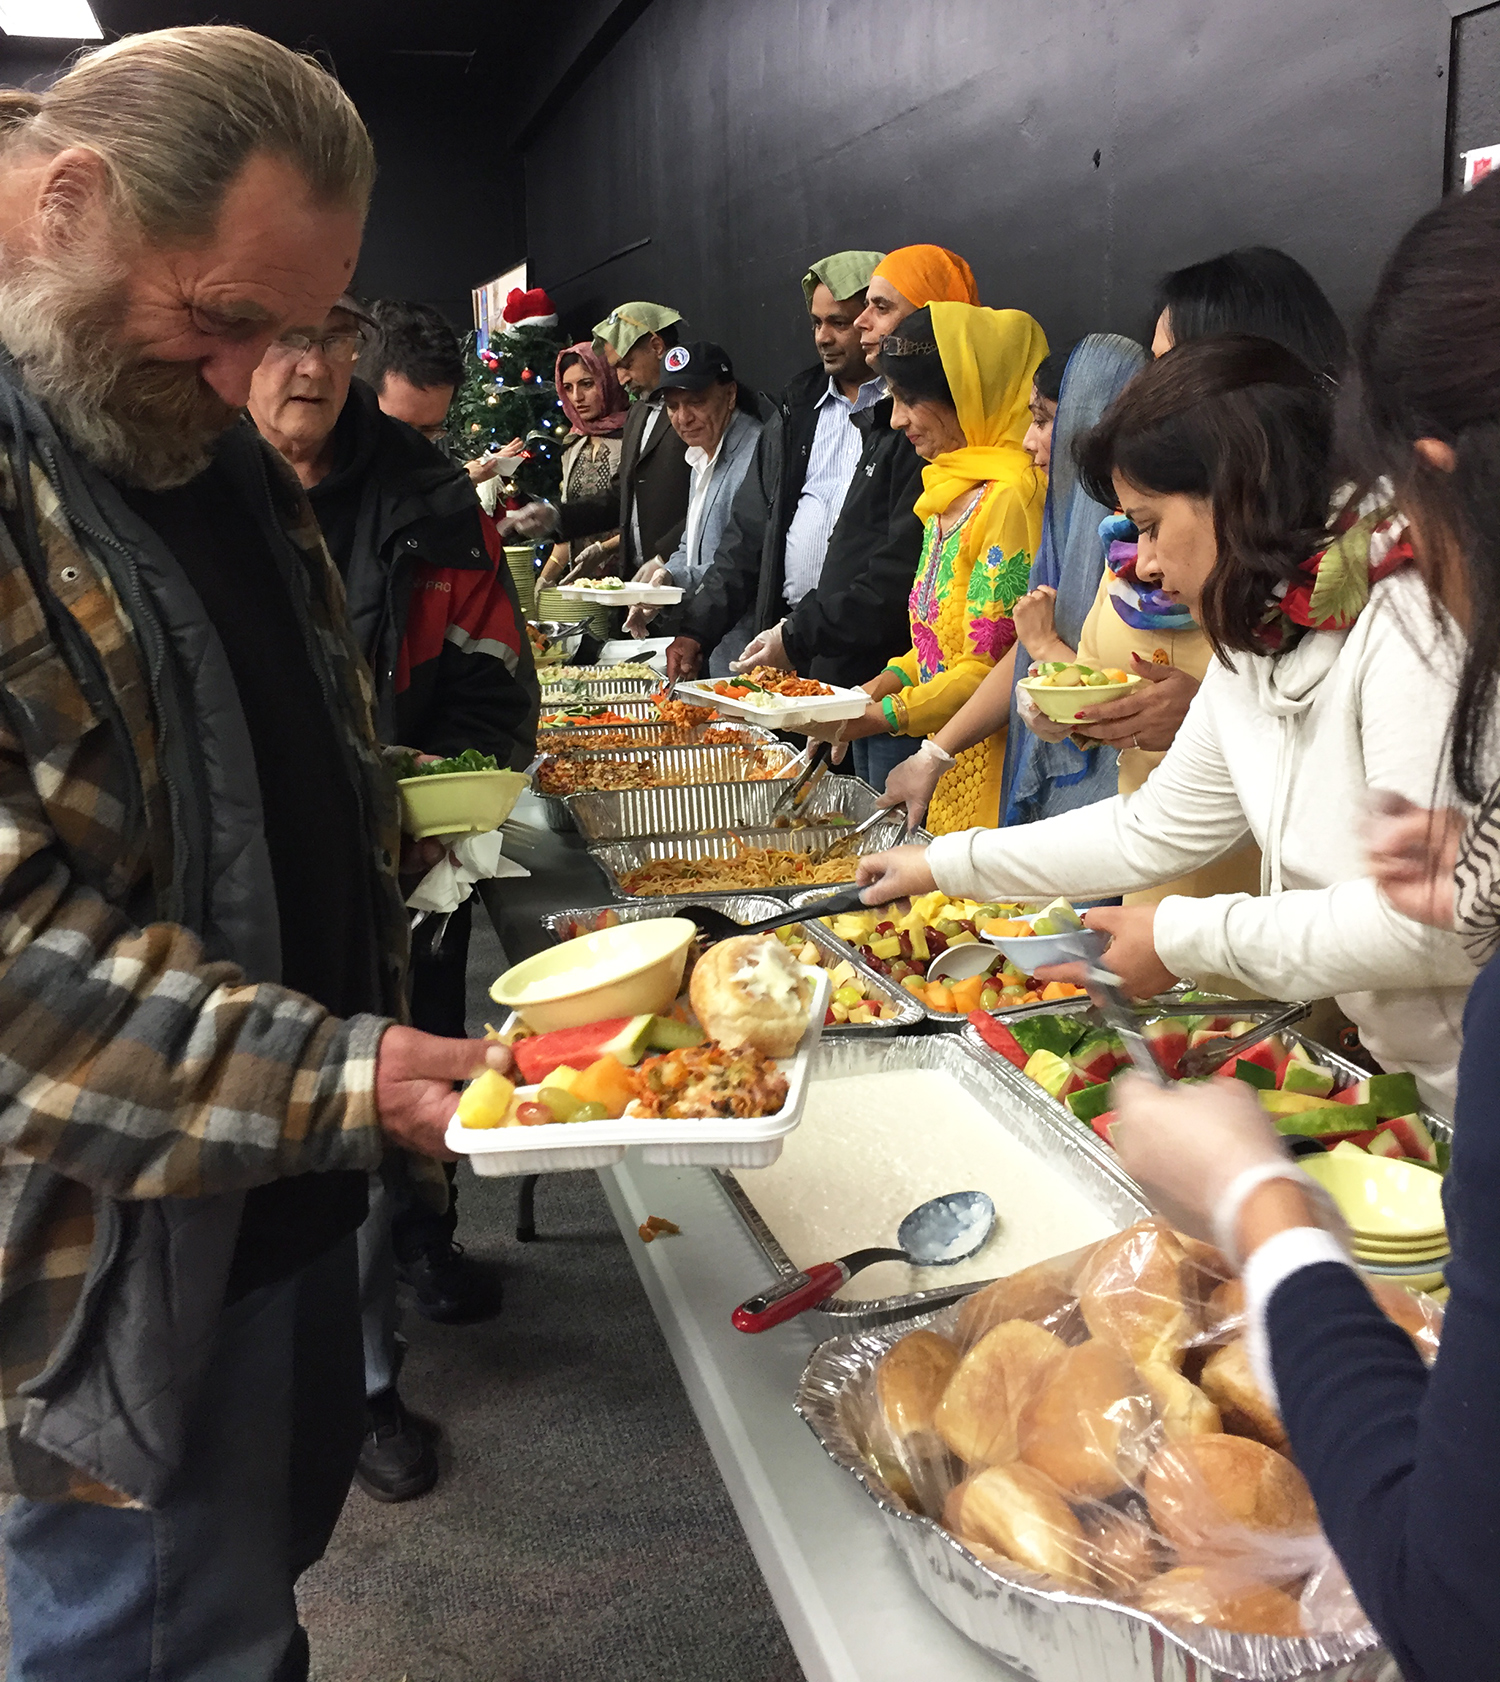 Sikh community partners with Salvation Army to provide a free community dinner